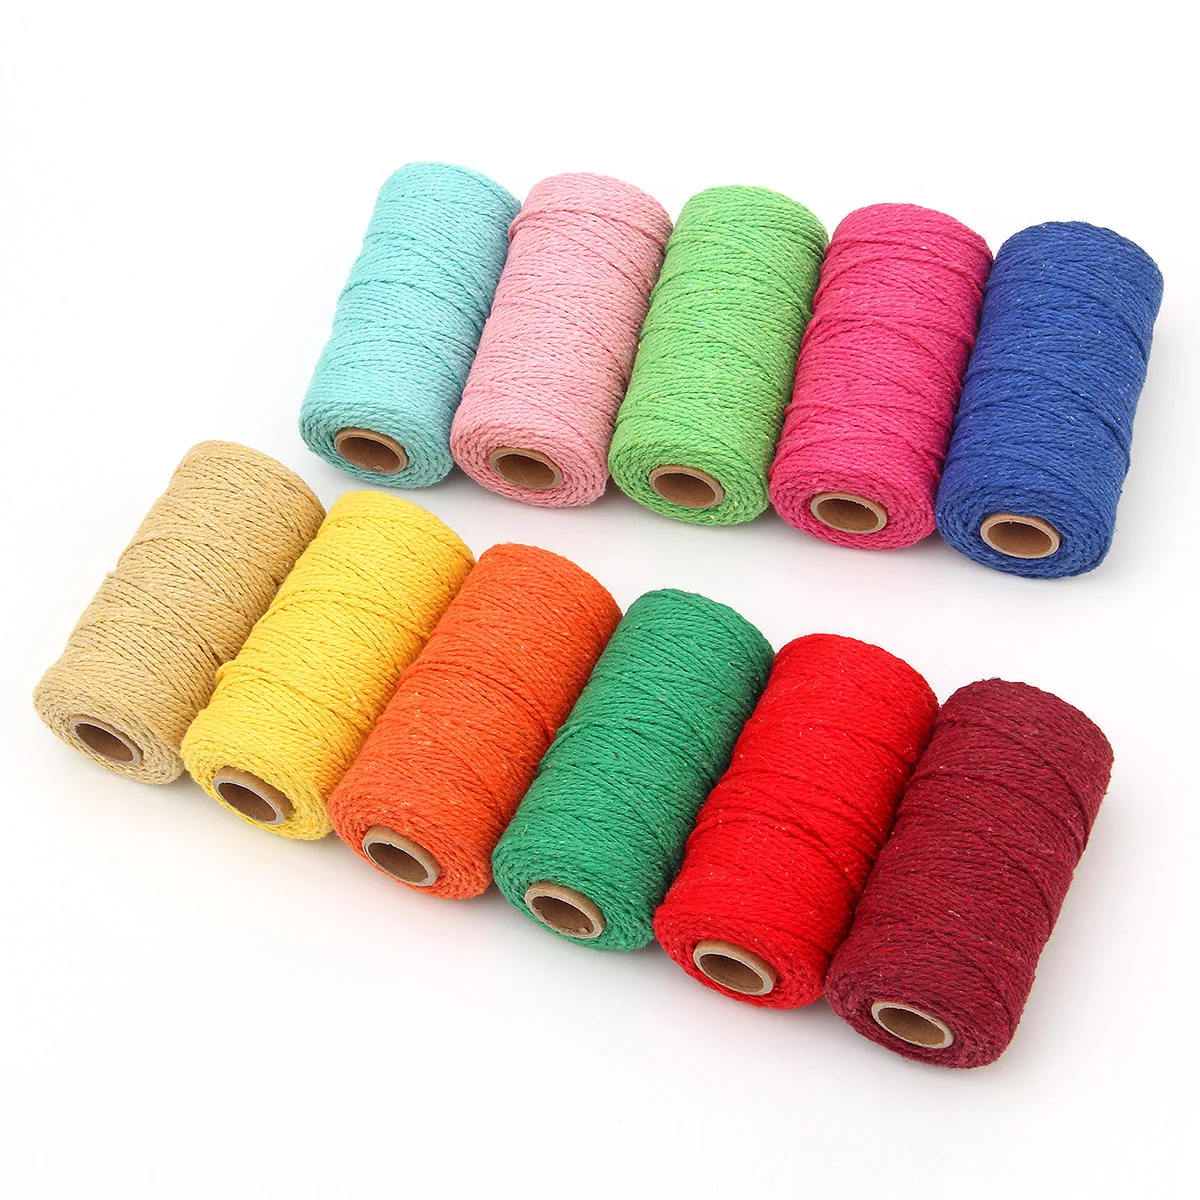 

1pcs 2-strand Colored Woven Cotton Rope 2mm Christmas Gift DIY Decorative Packaging Tapestry Rope Cotton Rope